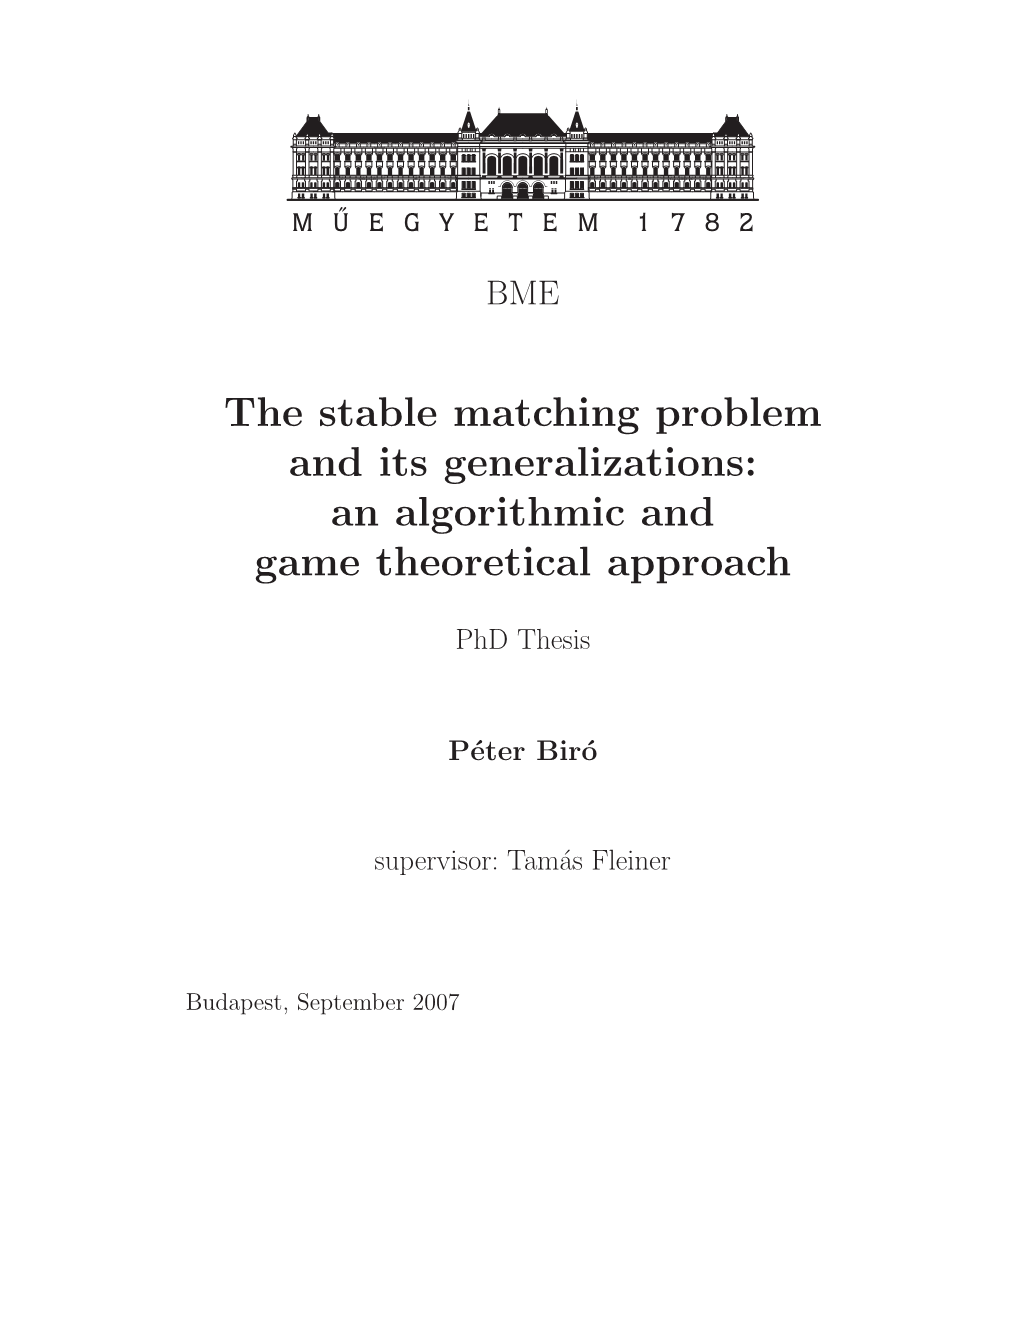 The Stable Matching Problem and Its Generalizations: an Algorithmic and Game Theoretical Approach